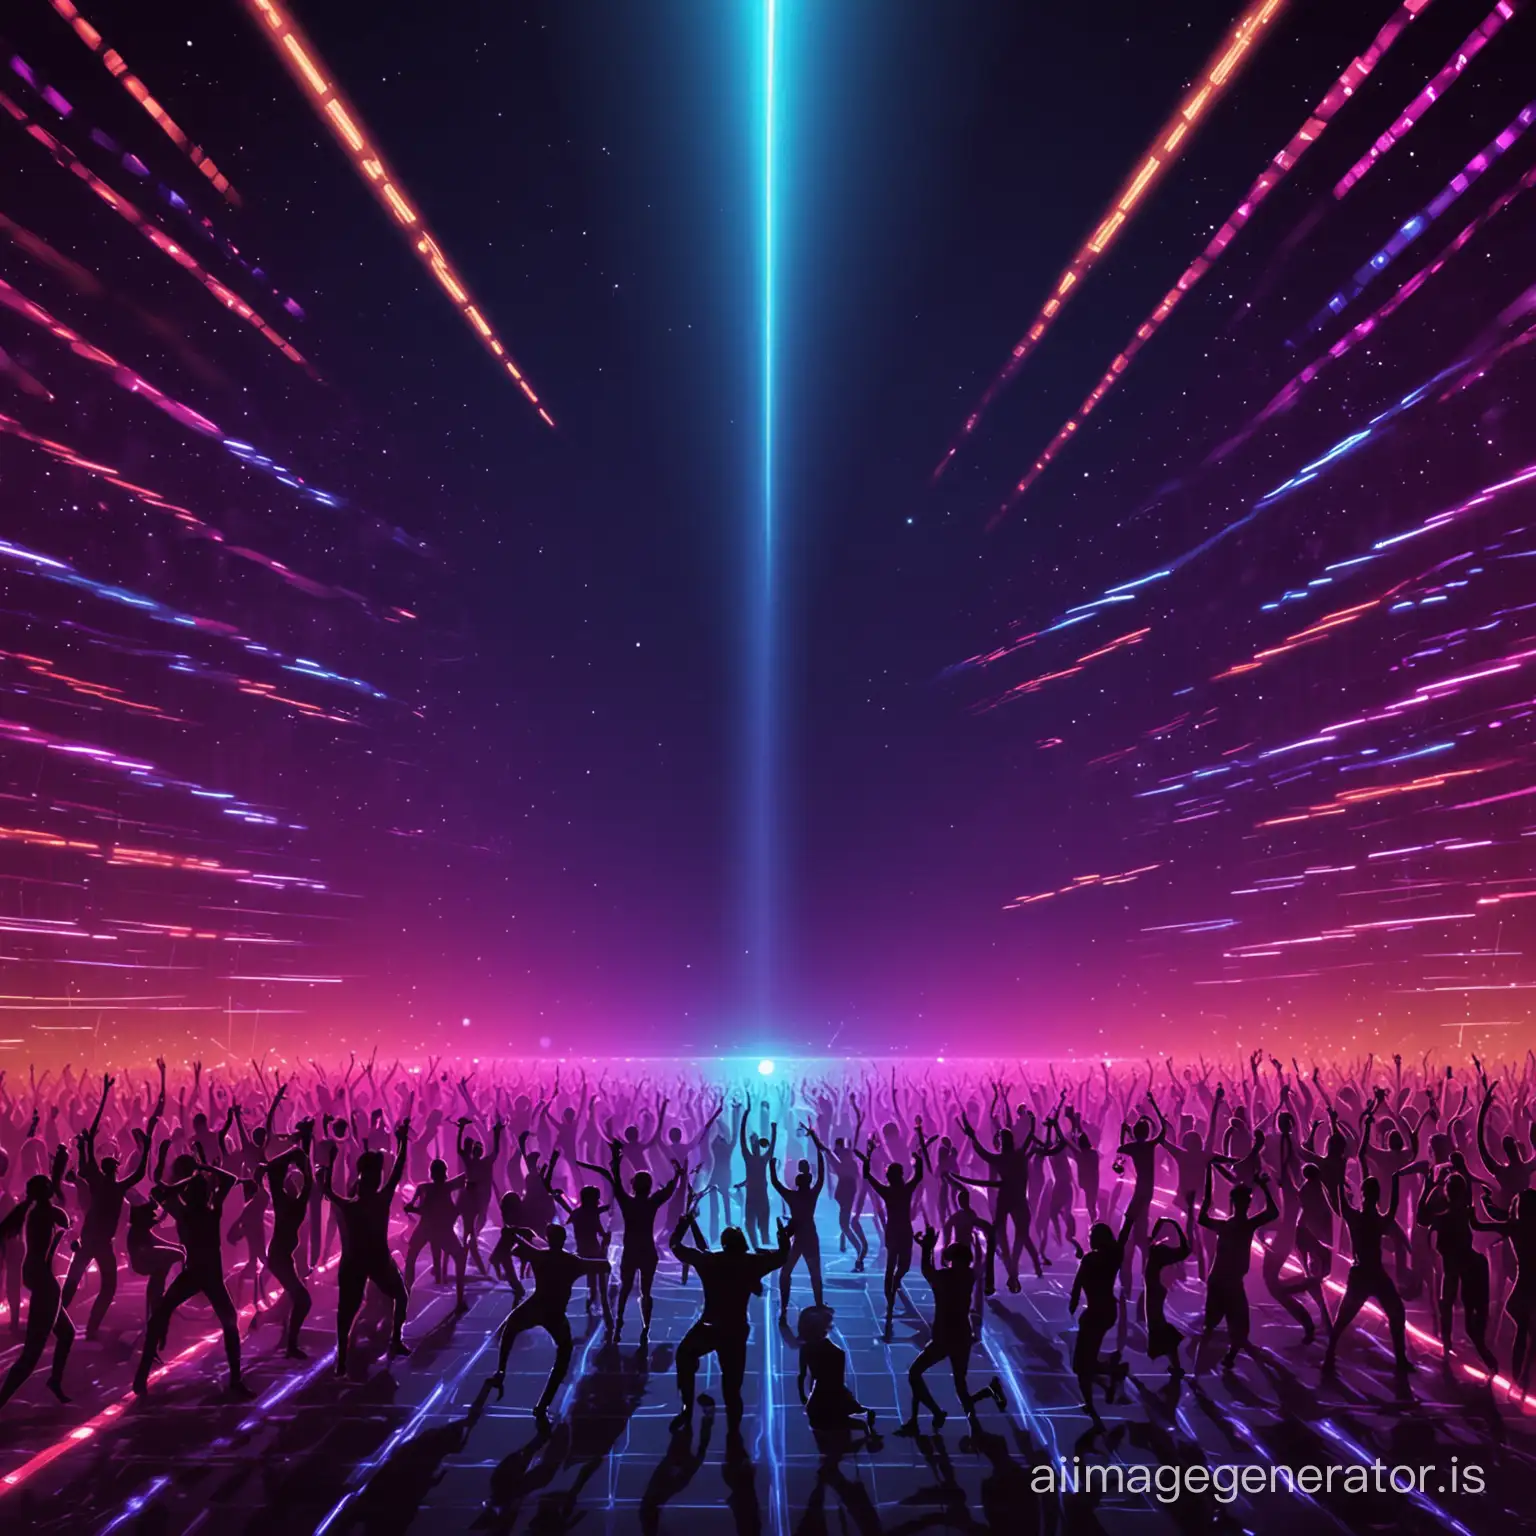 background for party flyer without text, crowd, energy, neon